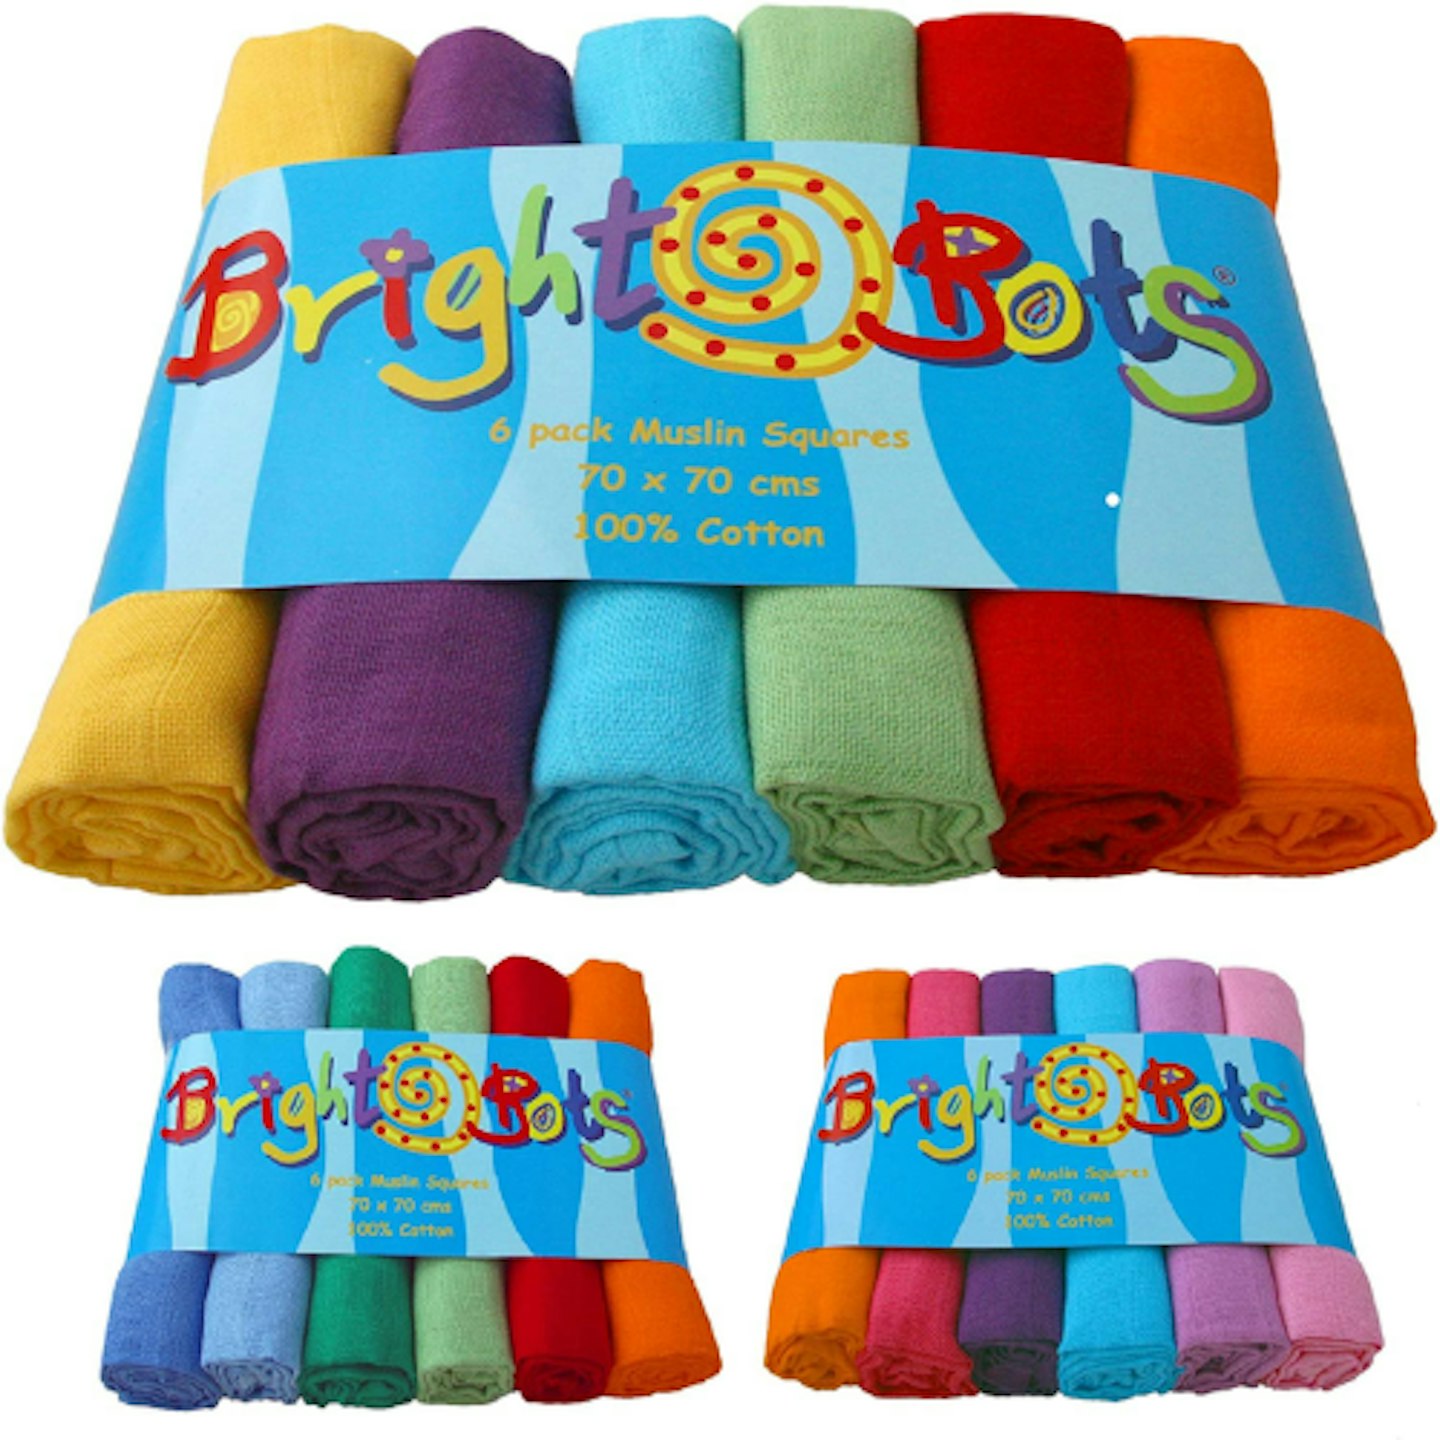 Best baby muslin cloths Bright Bots Unisex Combo Muslin Squares